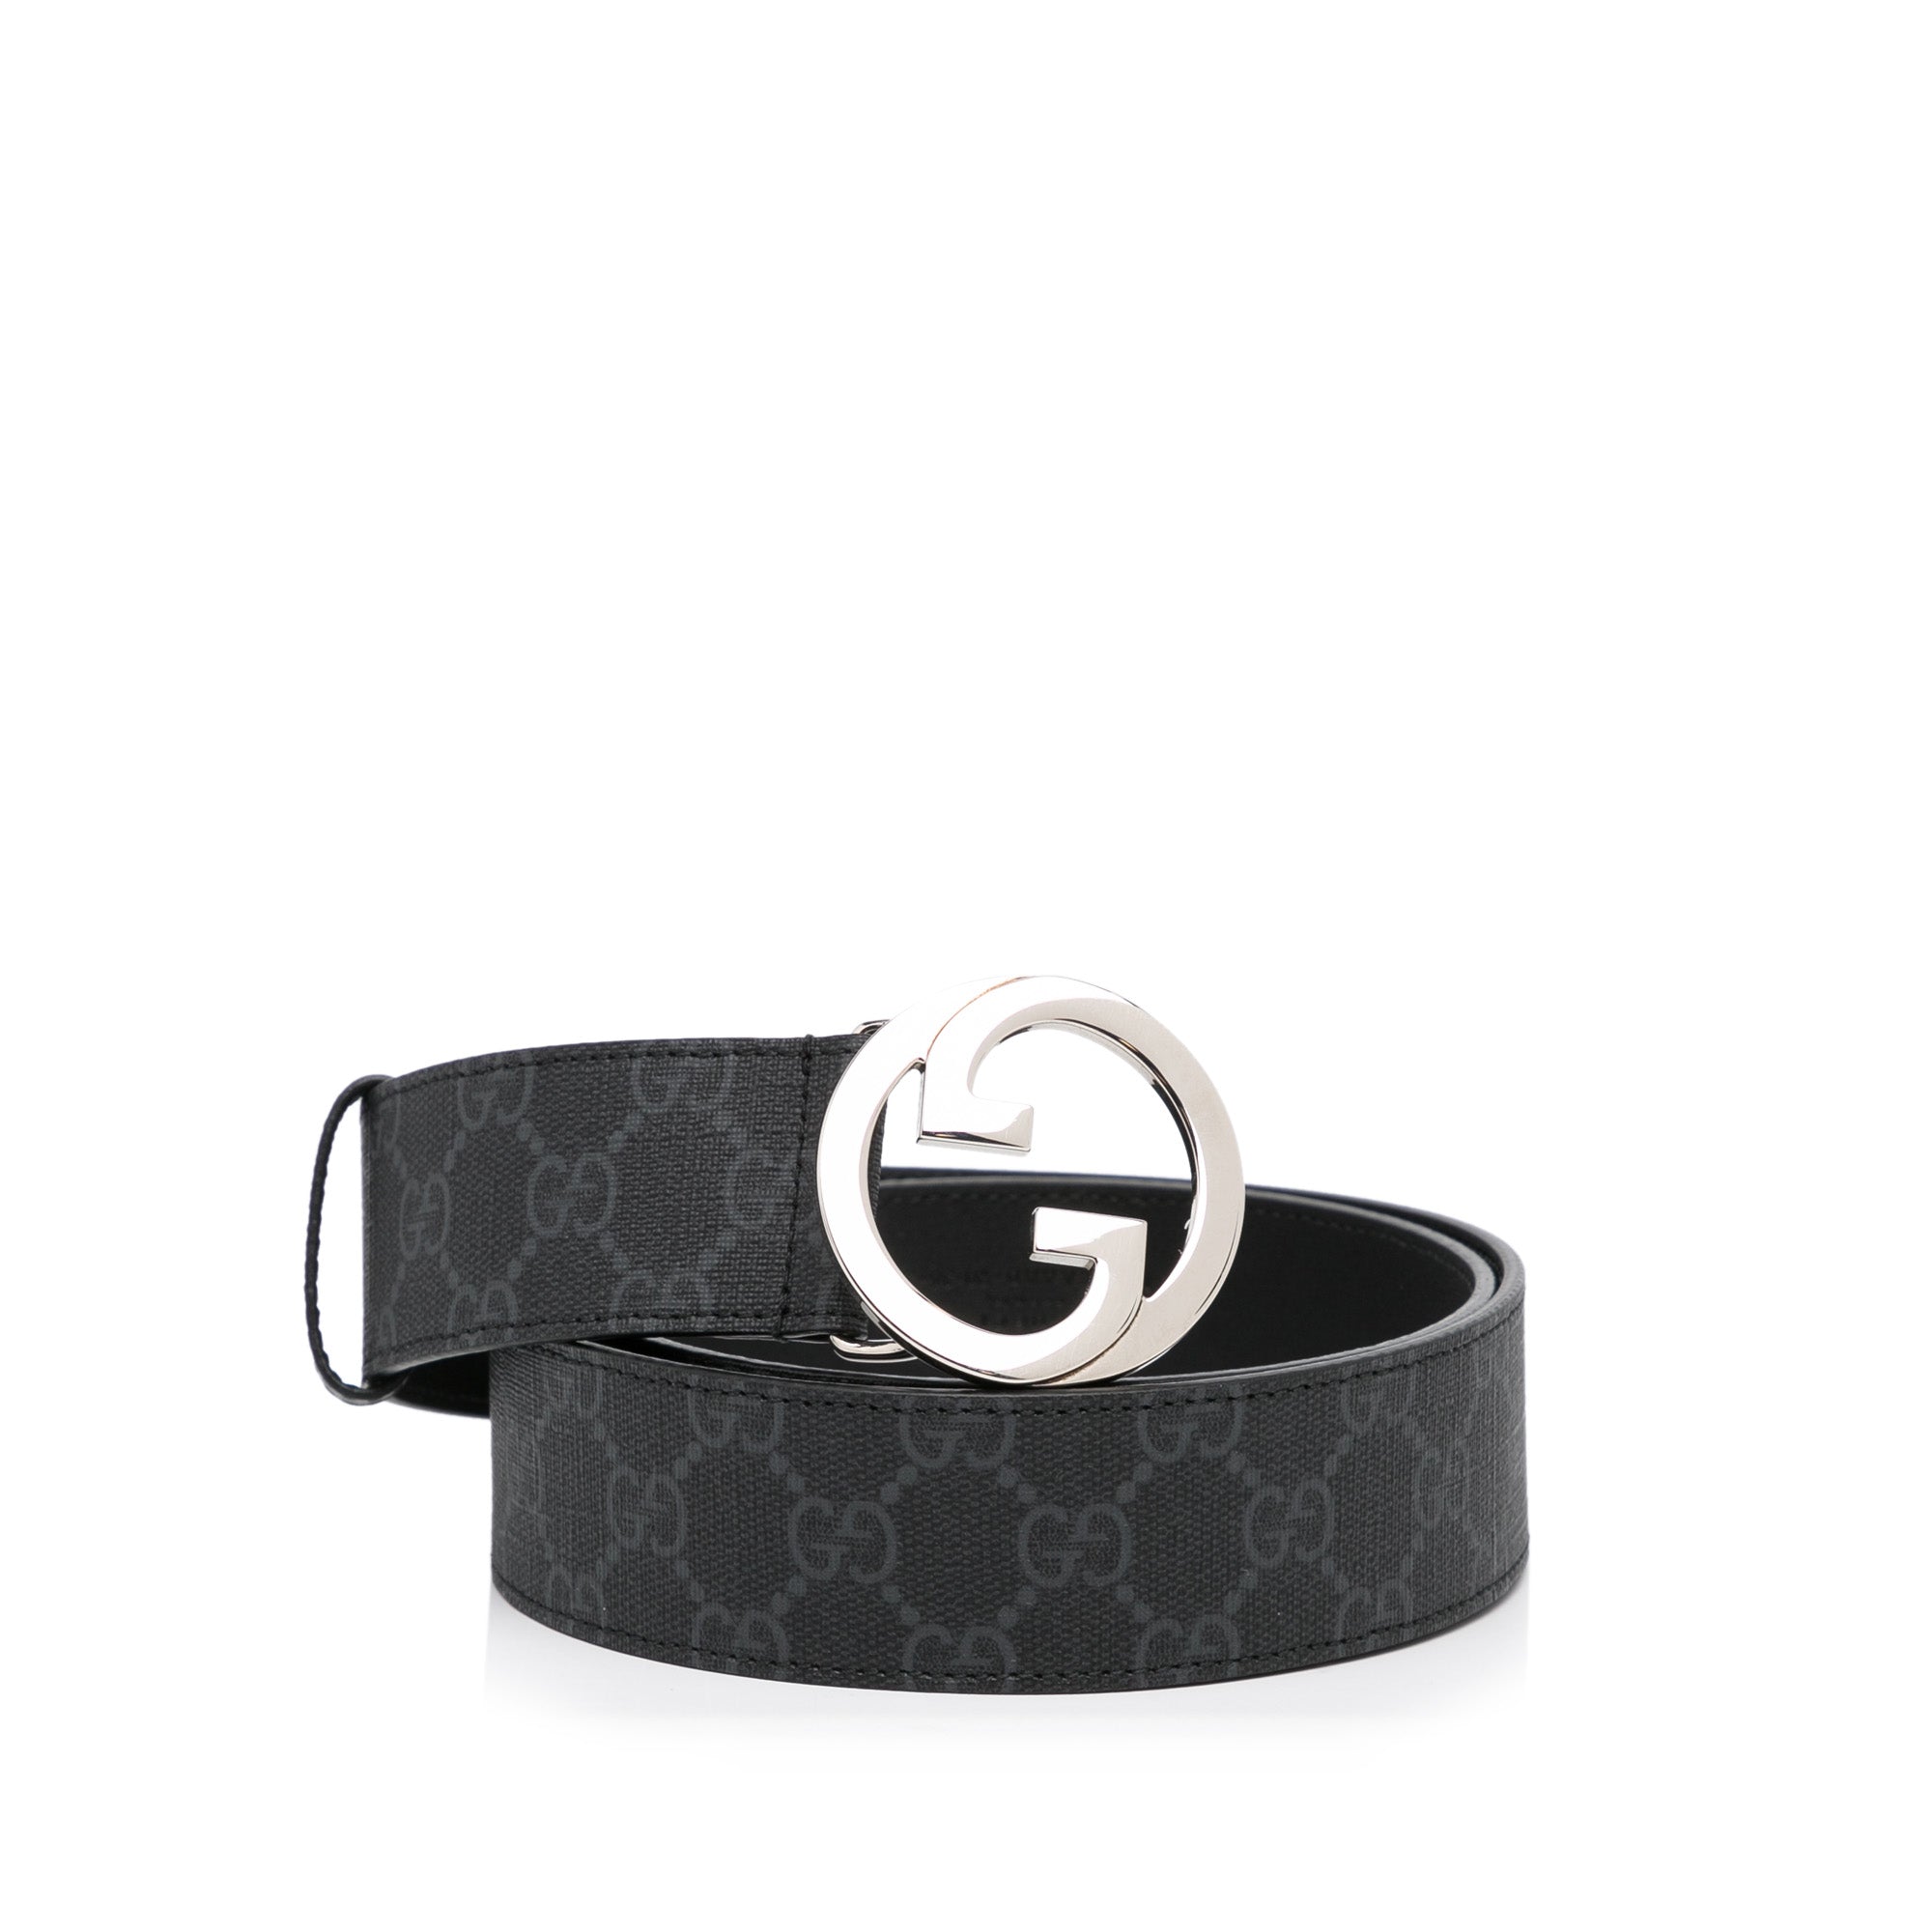 GG Supreme belt with G buckle in Black GG Canvas